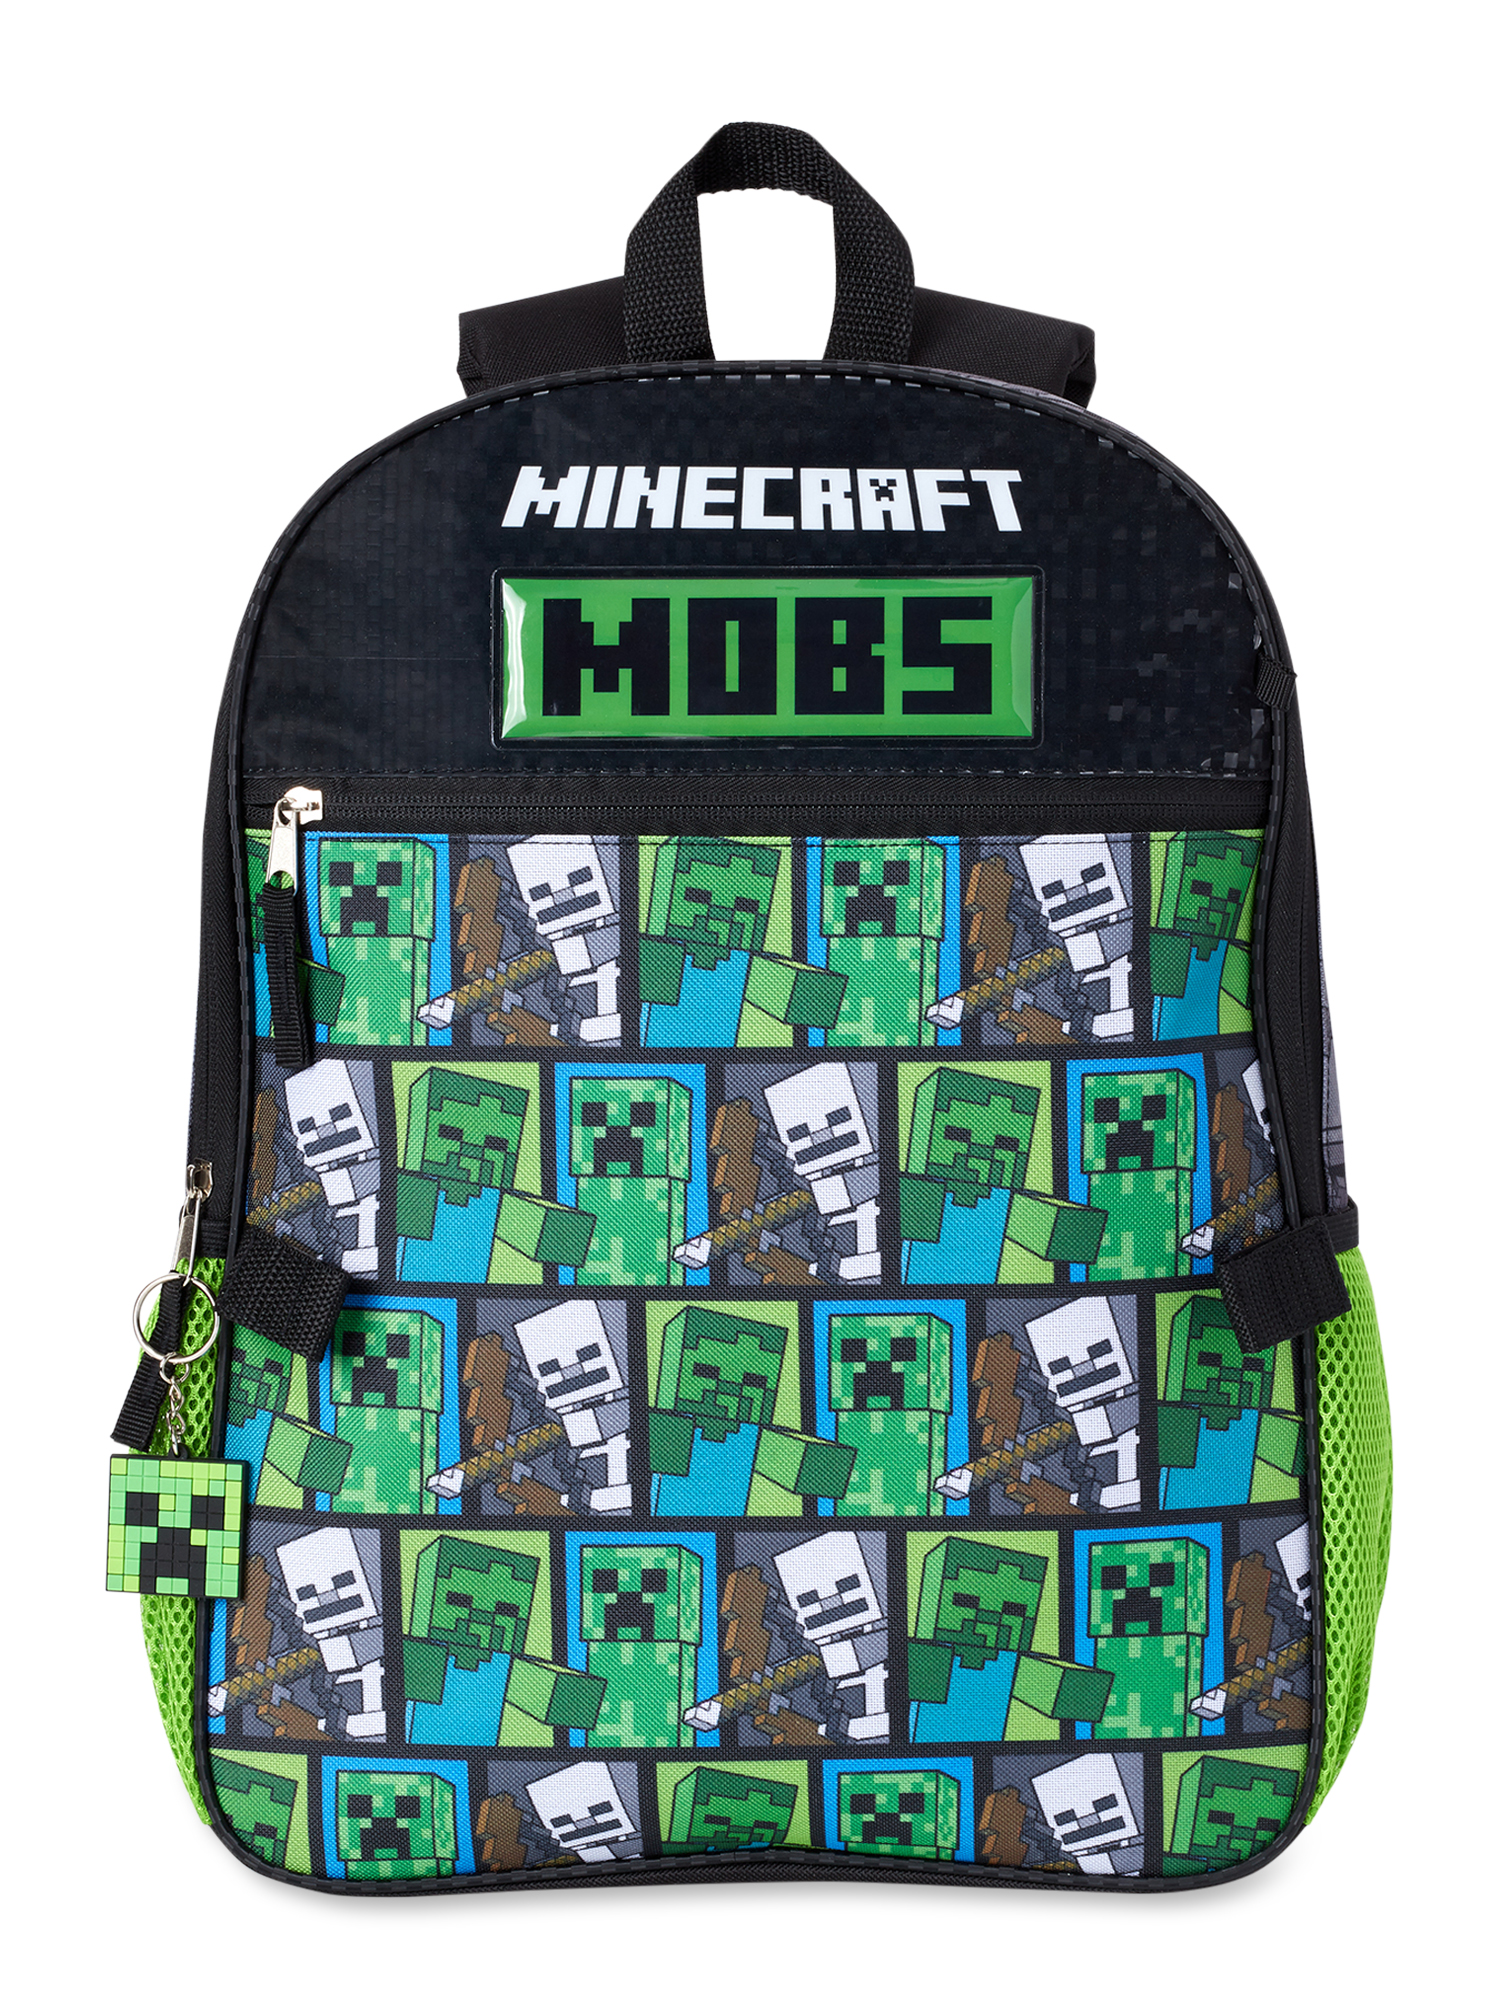 Minecraft Backpack Set, 5-Pieces - image 2 of 8